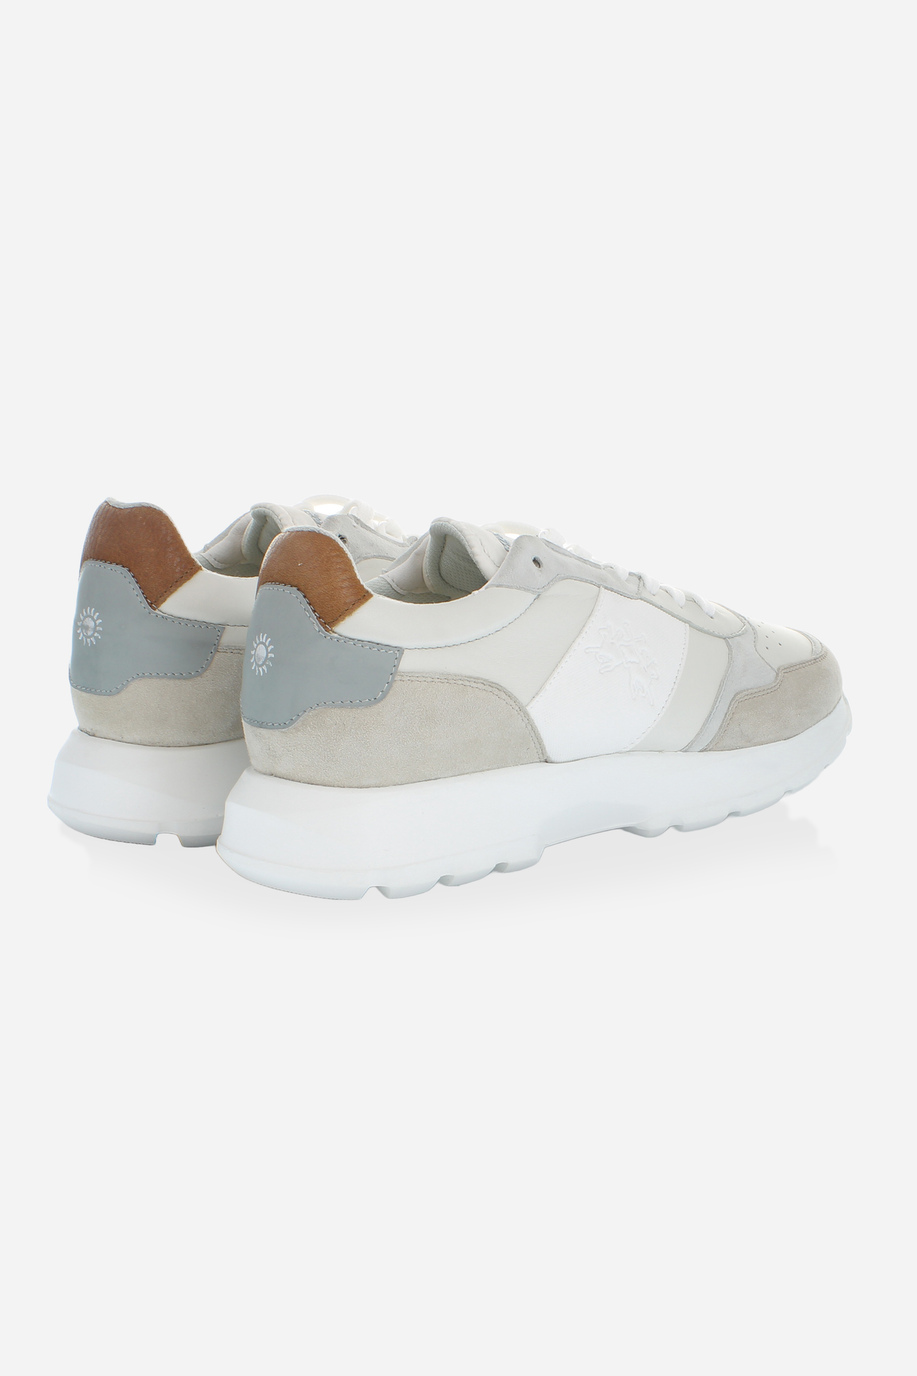 Trainers in mix of leather, fabric and suede - Footwear | La Martina - Official Online Shop